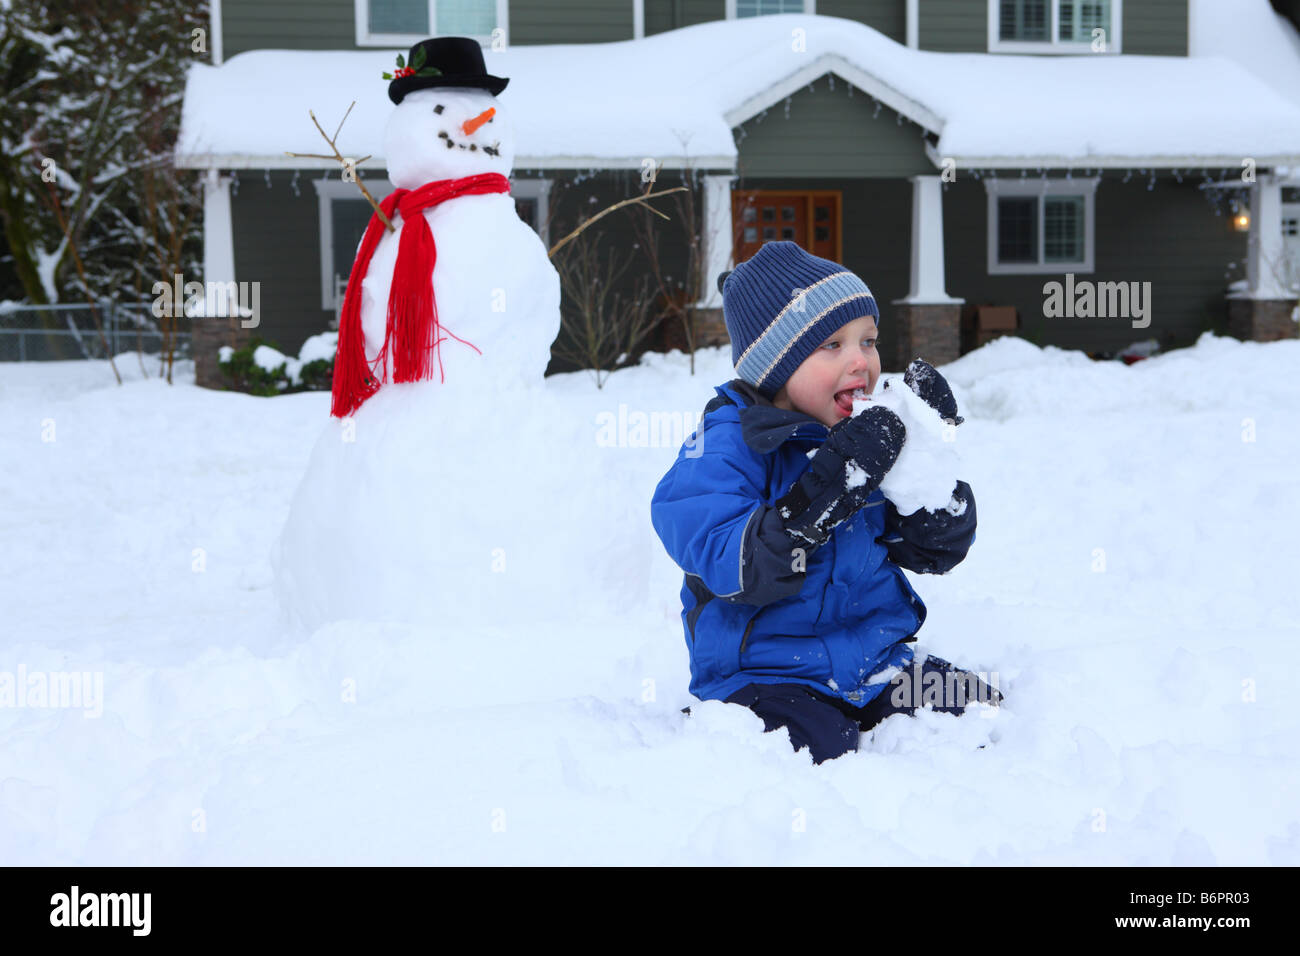 Young boy eating snow with snowman and home in background Stock Photo